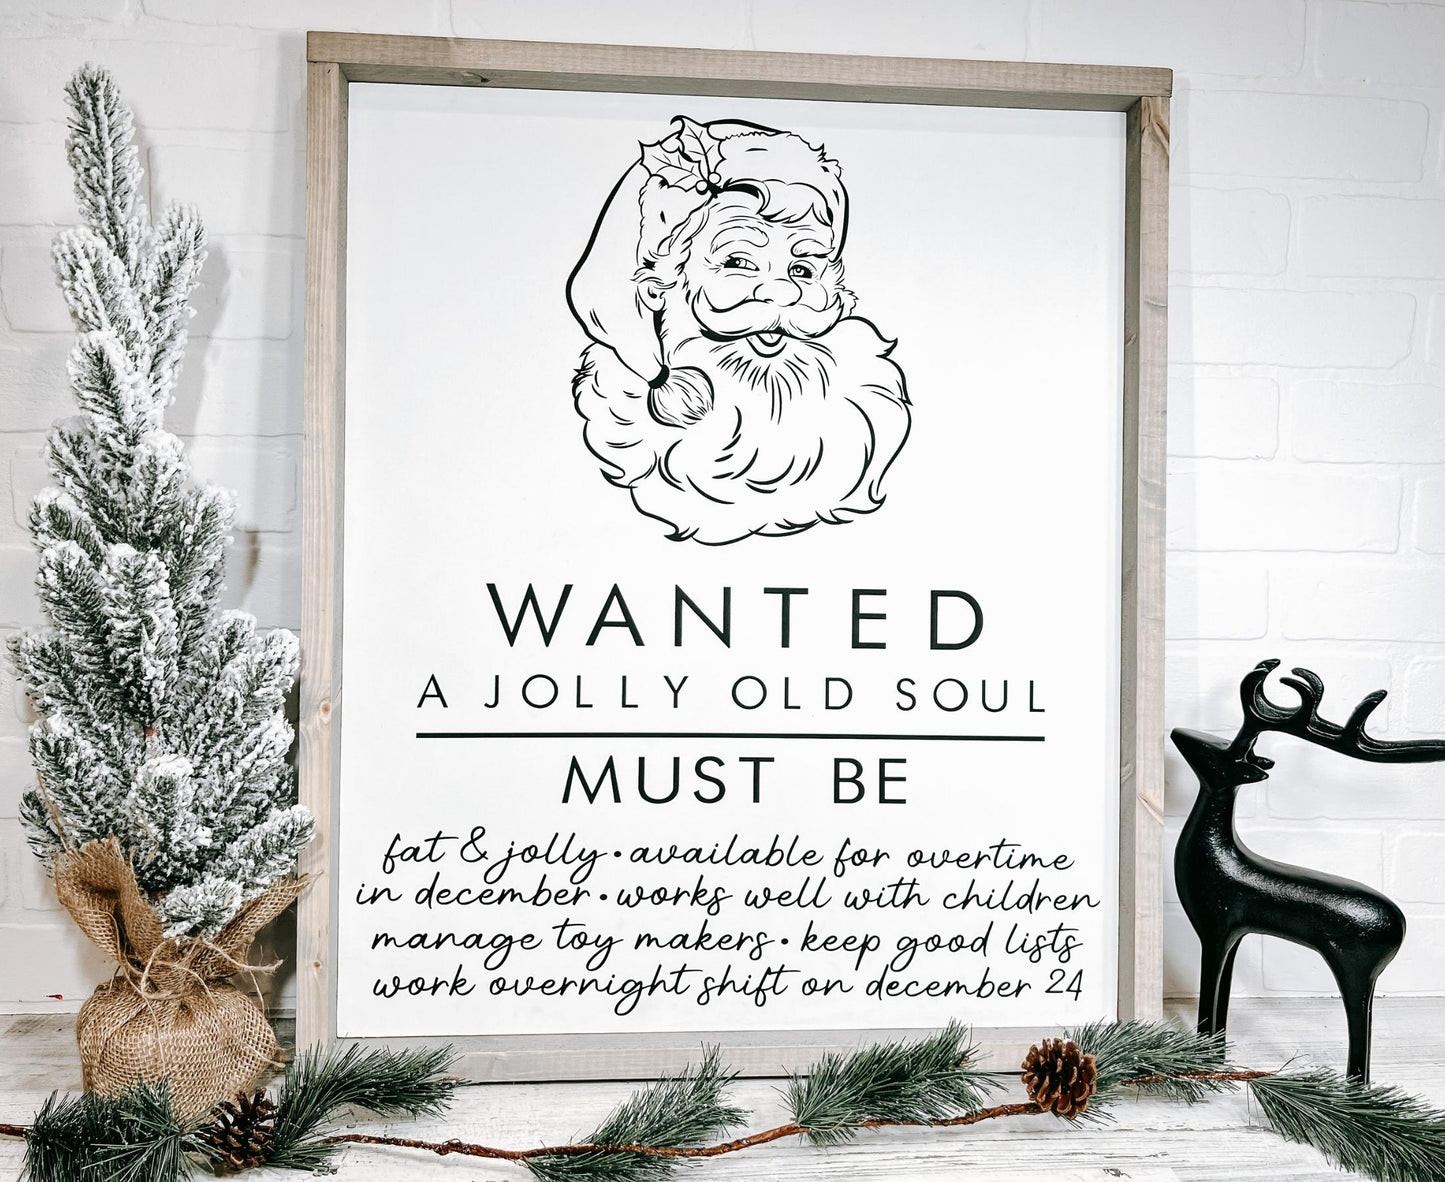 Wanted Santa A Jolly Old Soul - B-Cozy Home Decor